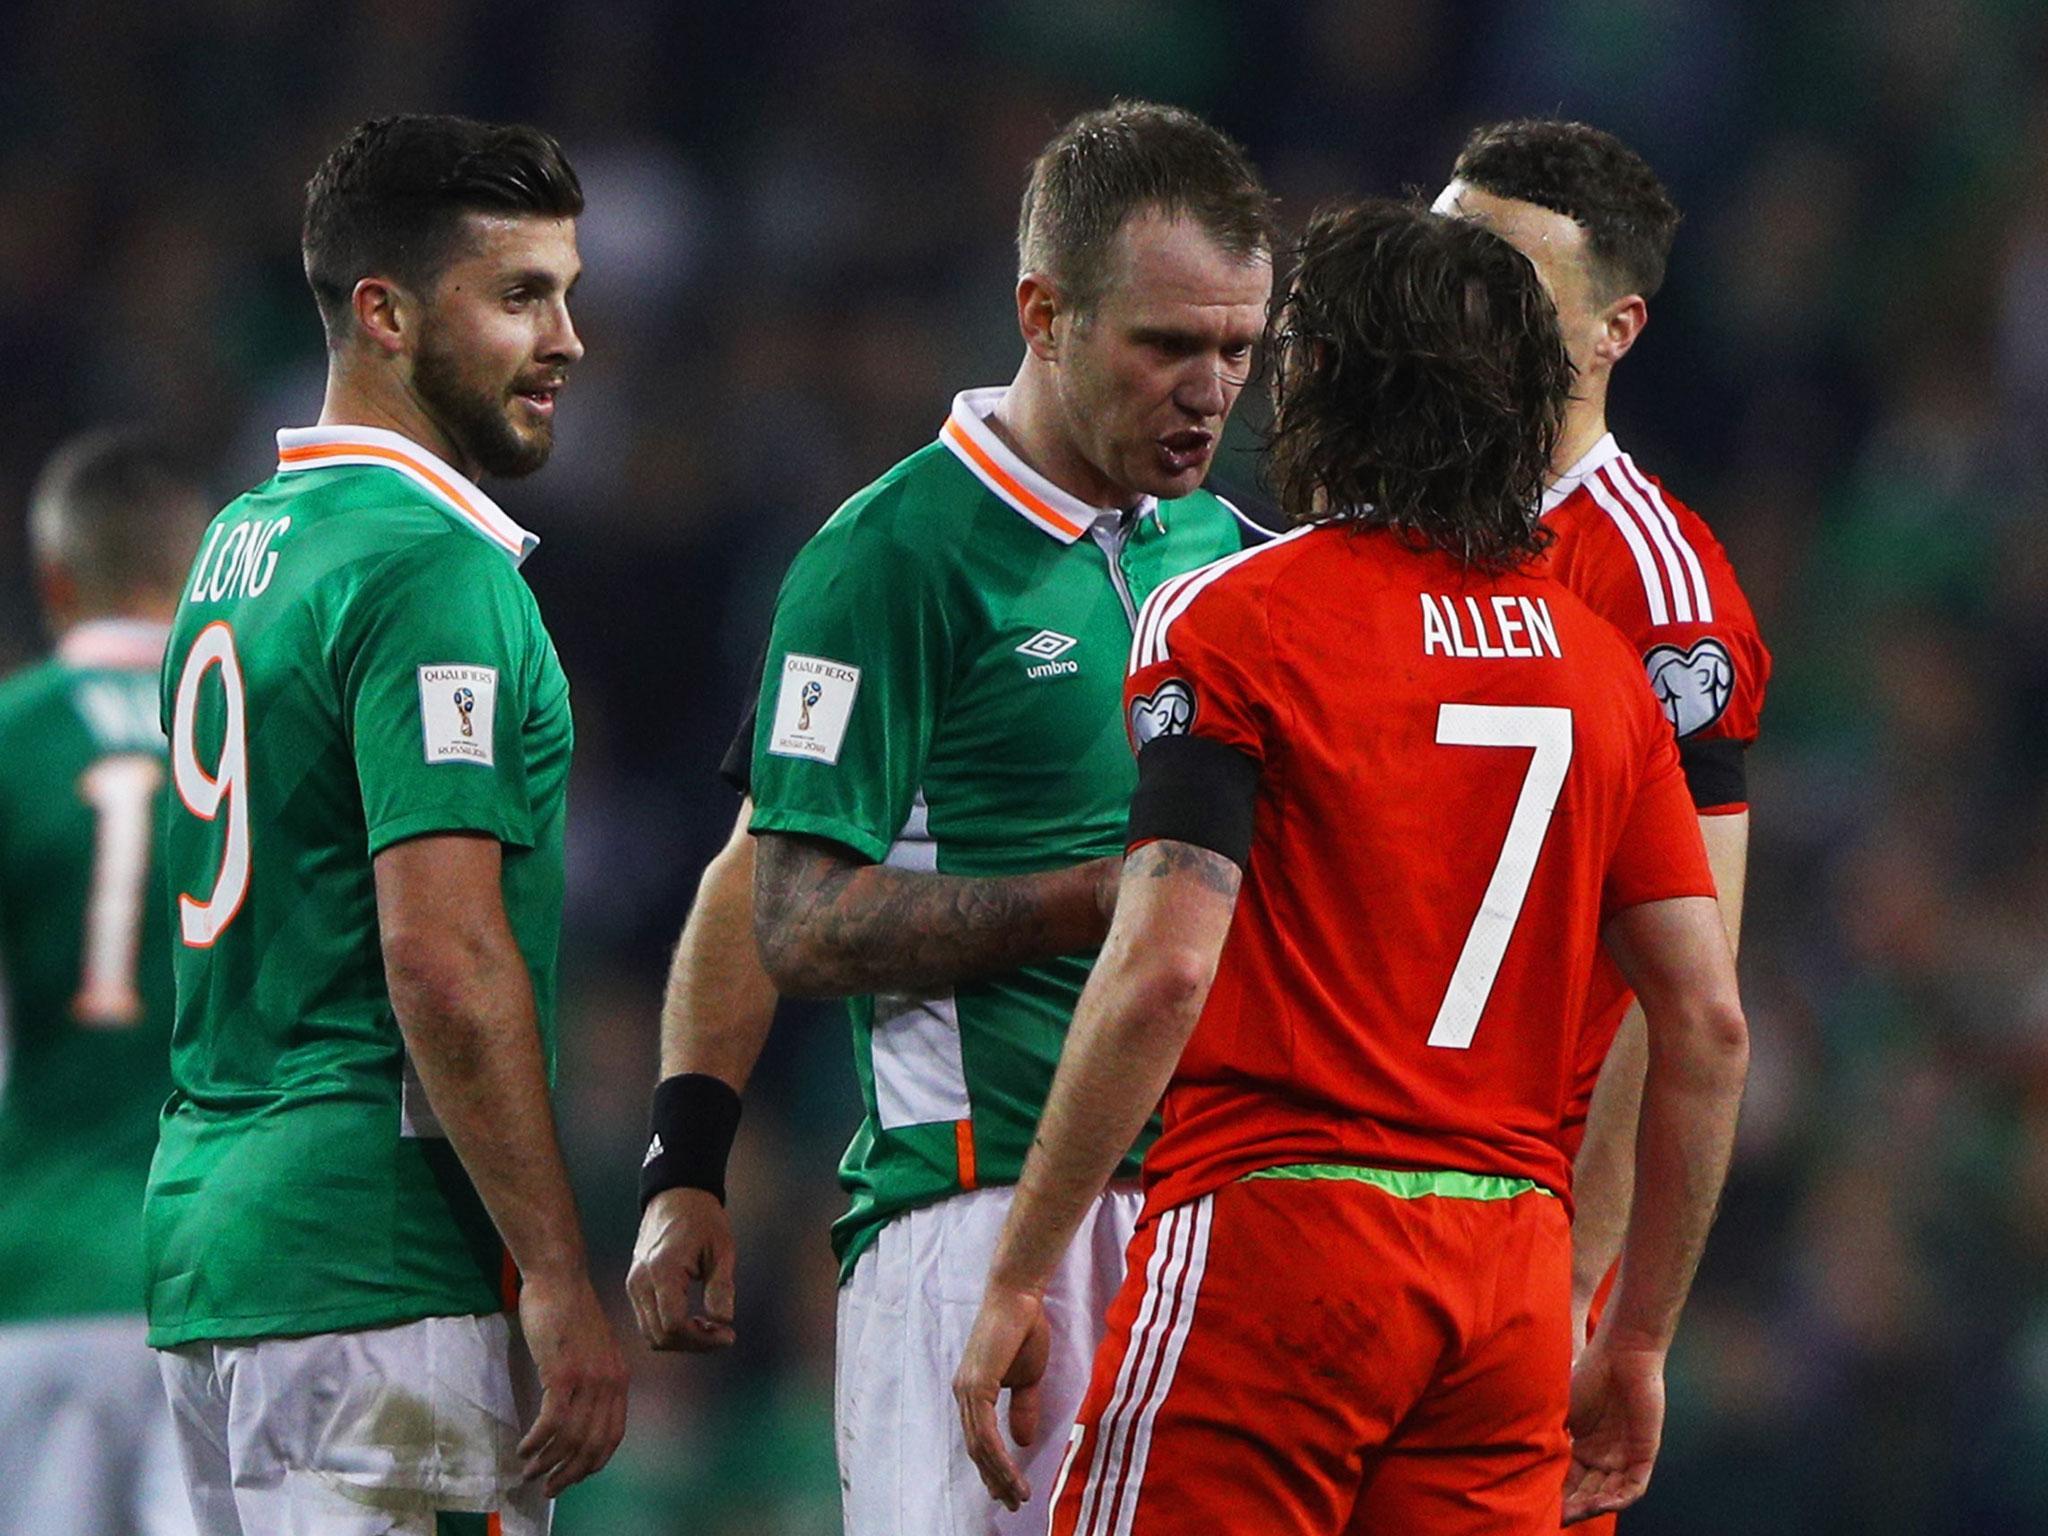 Ireland and Wales go head to head with everything to play for